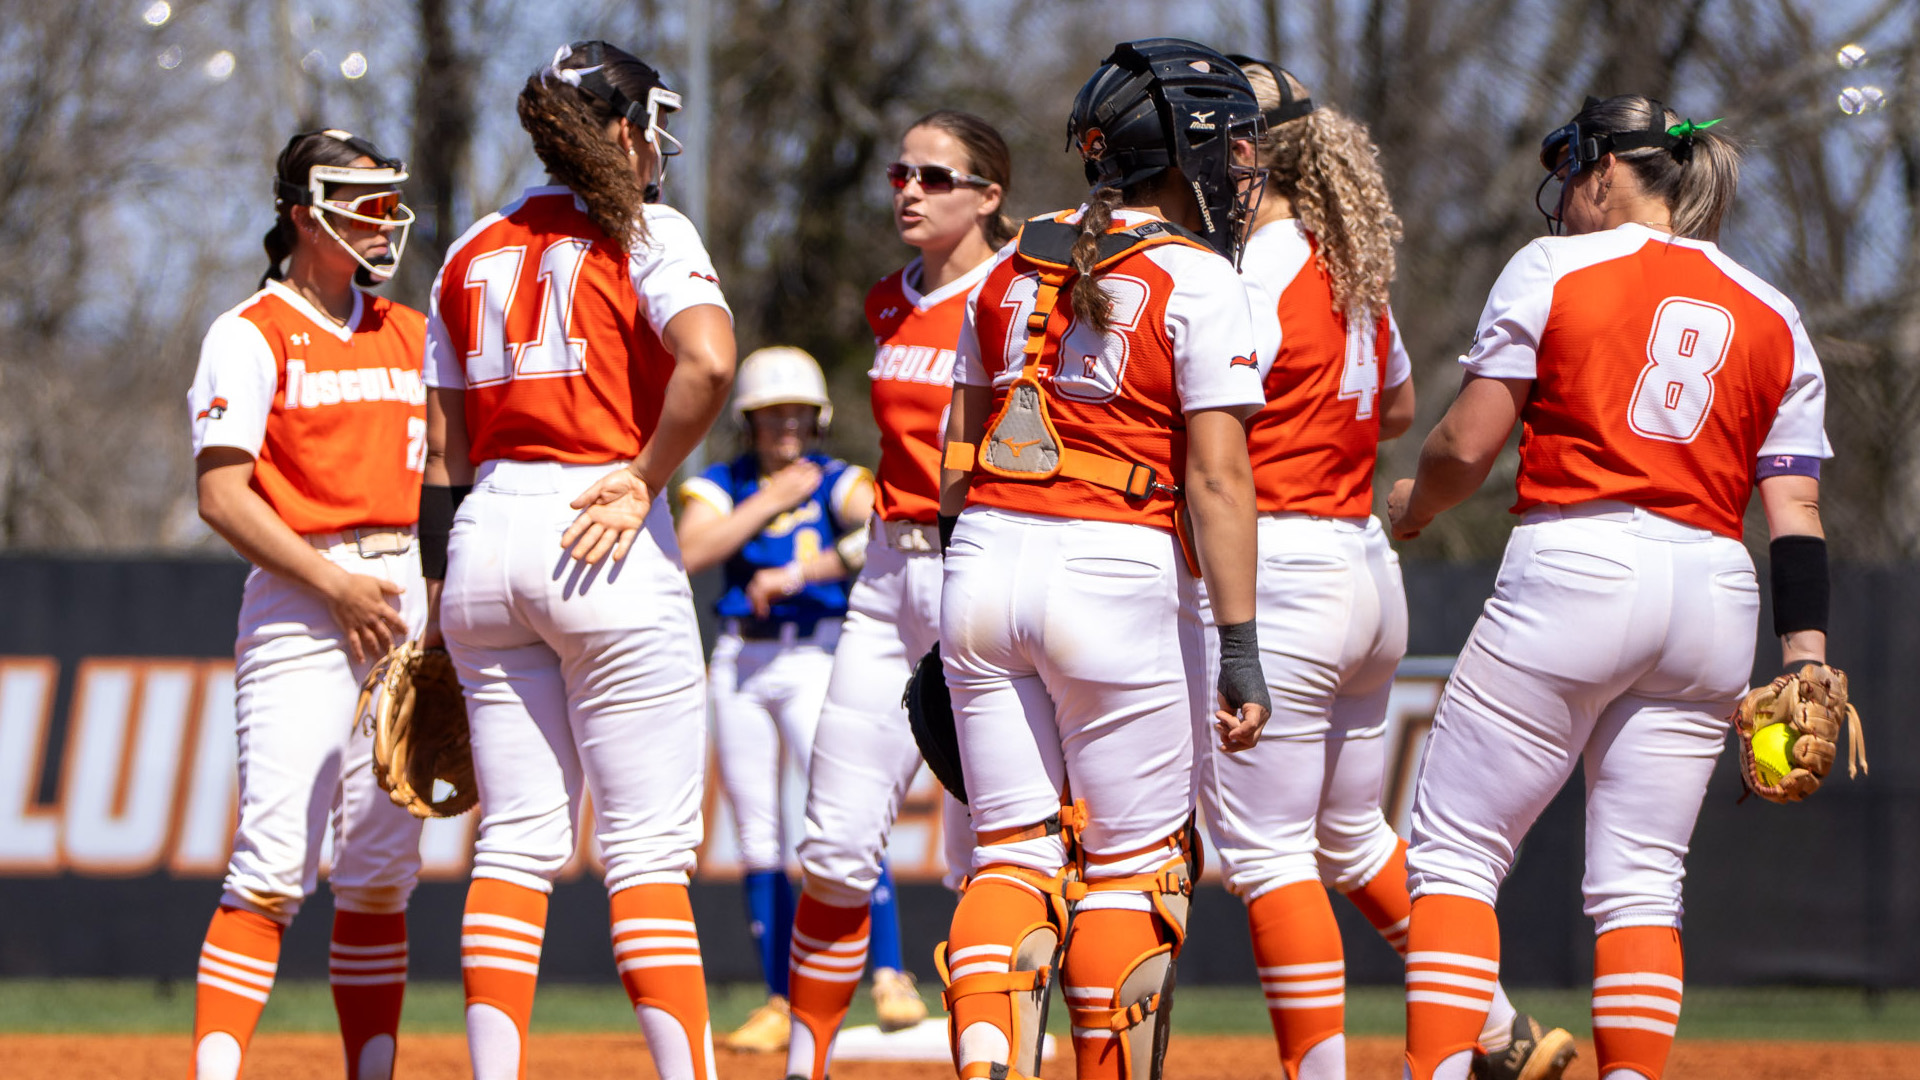 Records fall in Softball's sweep of Limestone